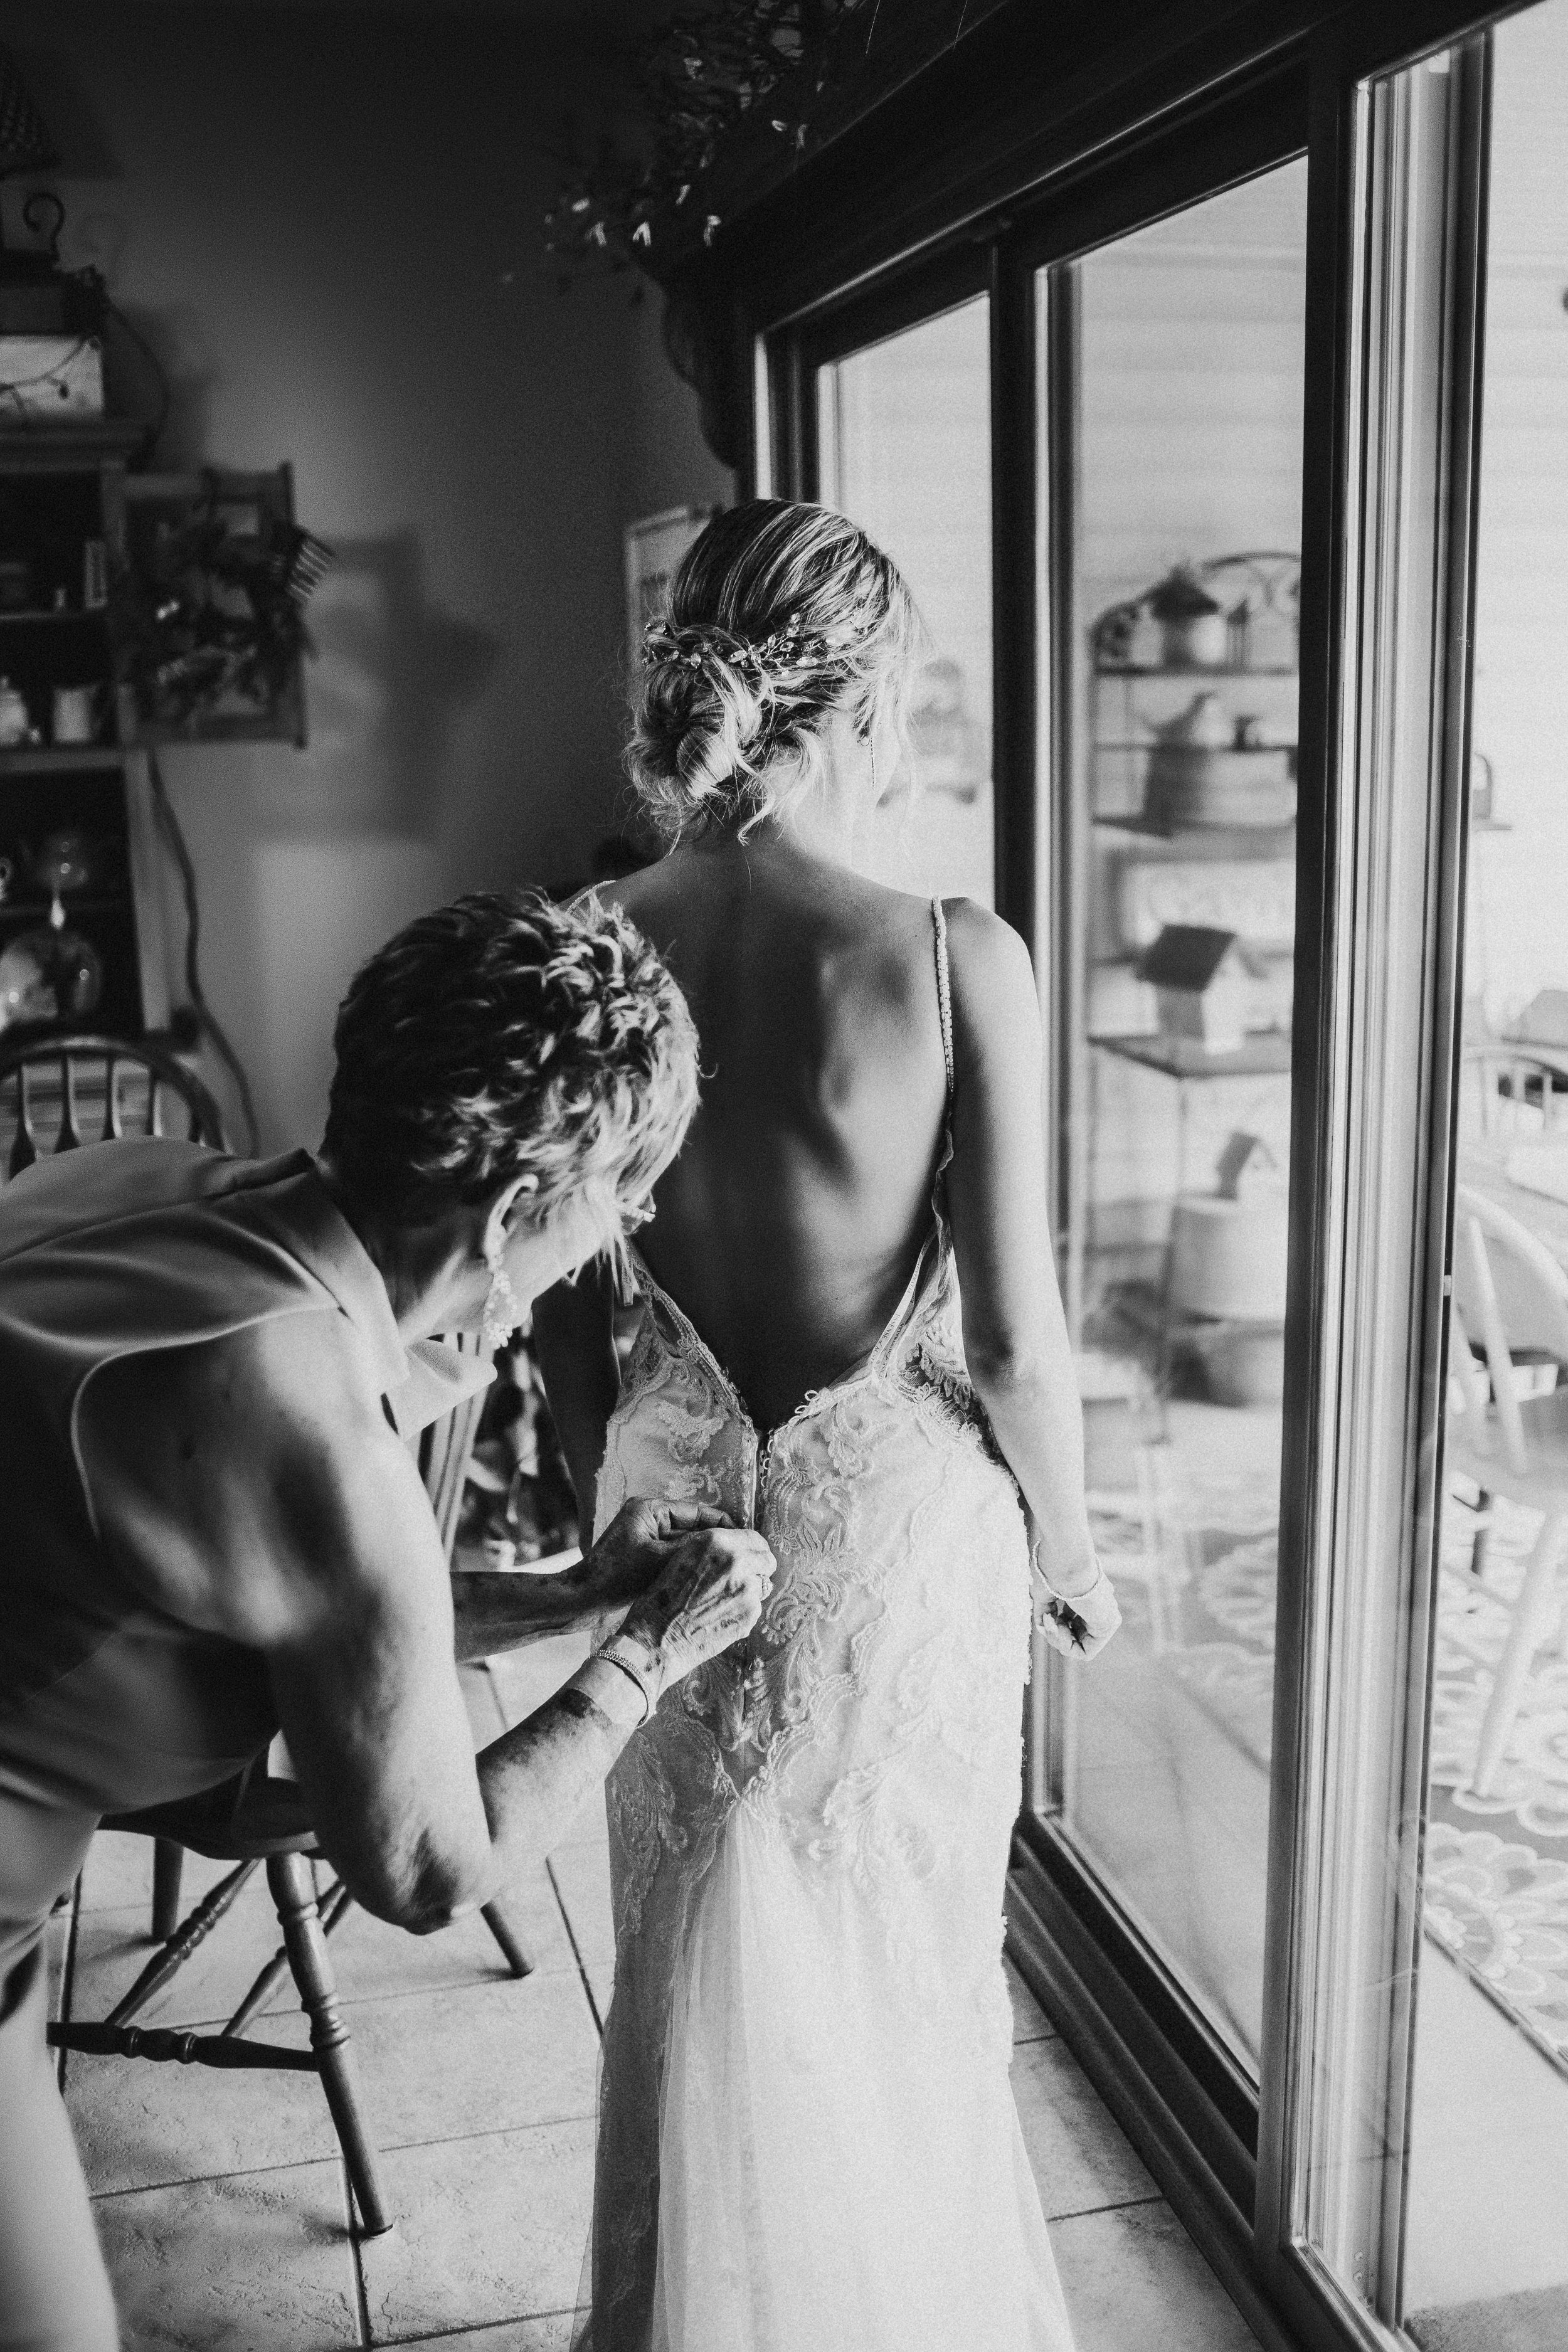  Mother of the bride helps the bride zip into her low backed lace wedding dress. updo at home casual wedding intimate ceremony #TealaWardPhotography #illinoisphotographer #princetonillinois #weddingphotographer #intimatewedding 